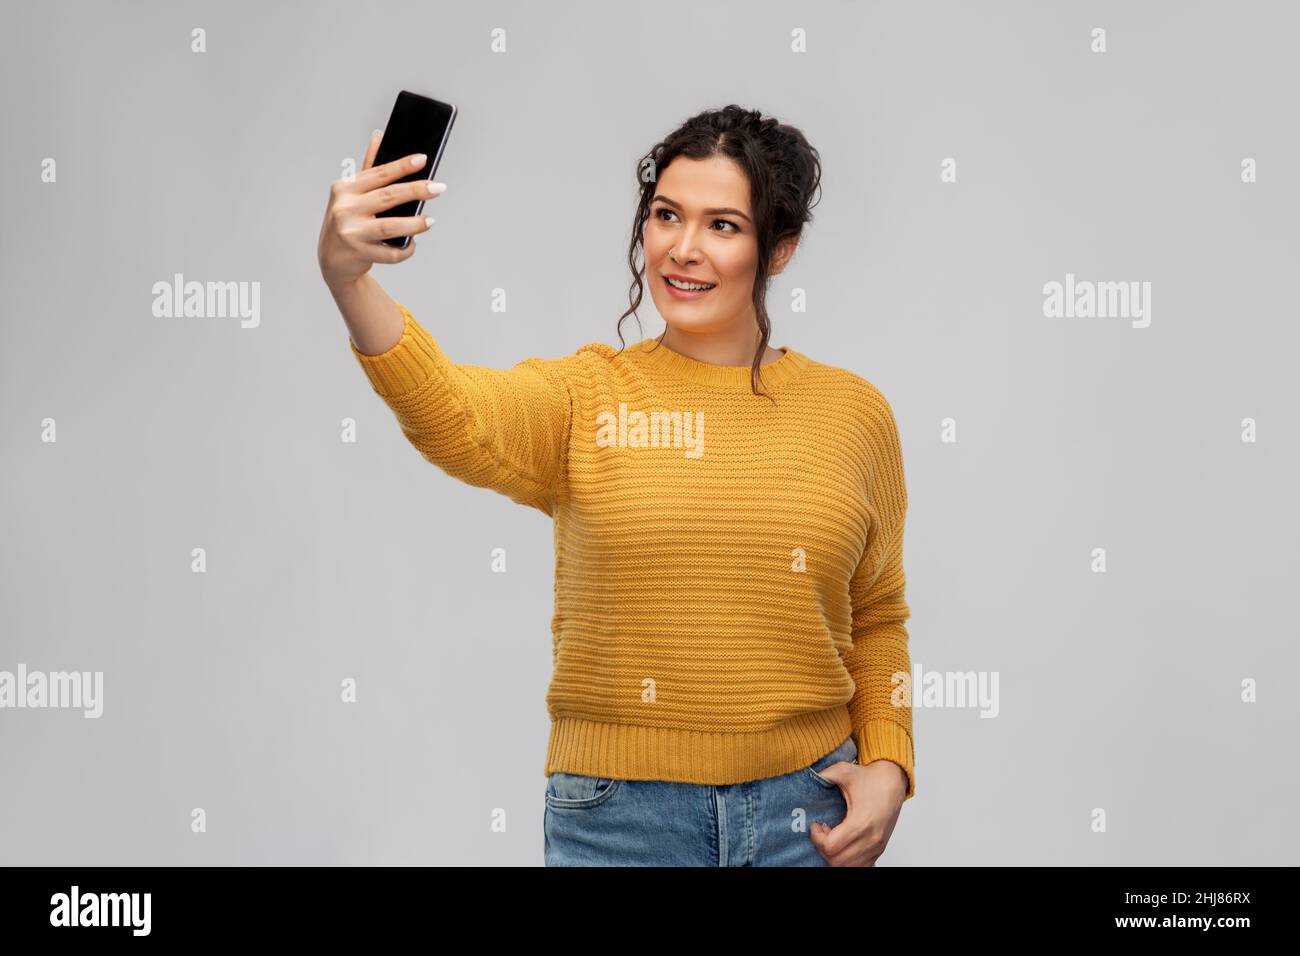 smiling young woman taking selfie by smartphone Stock Photo